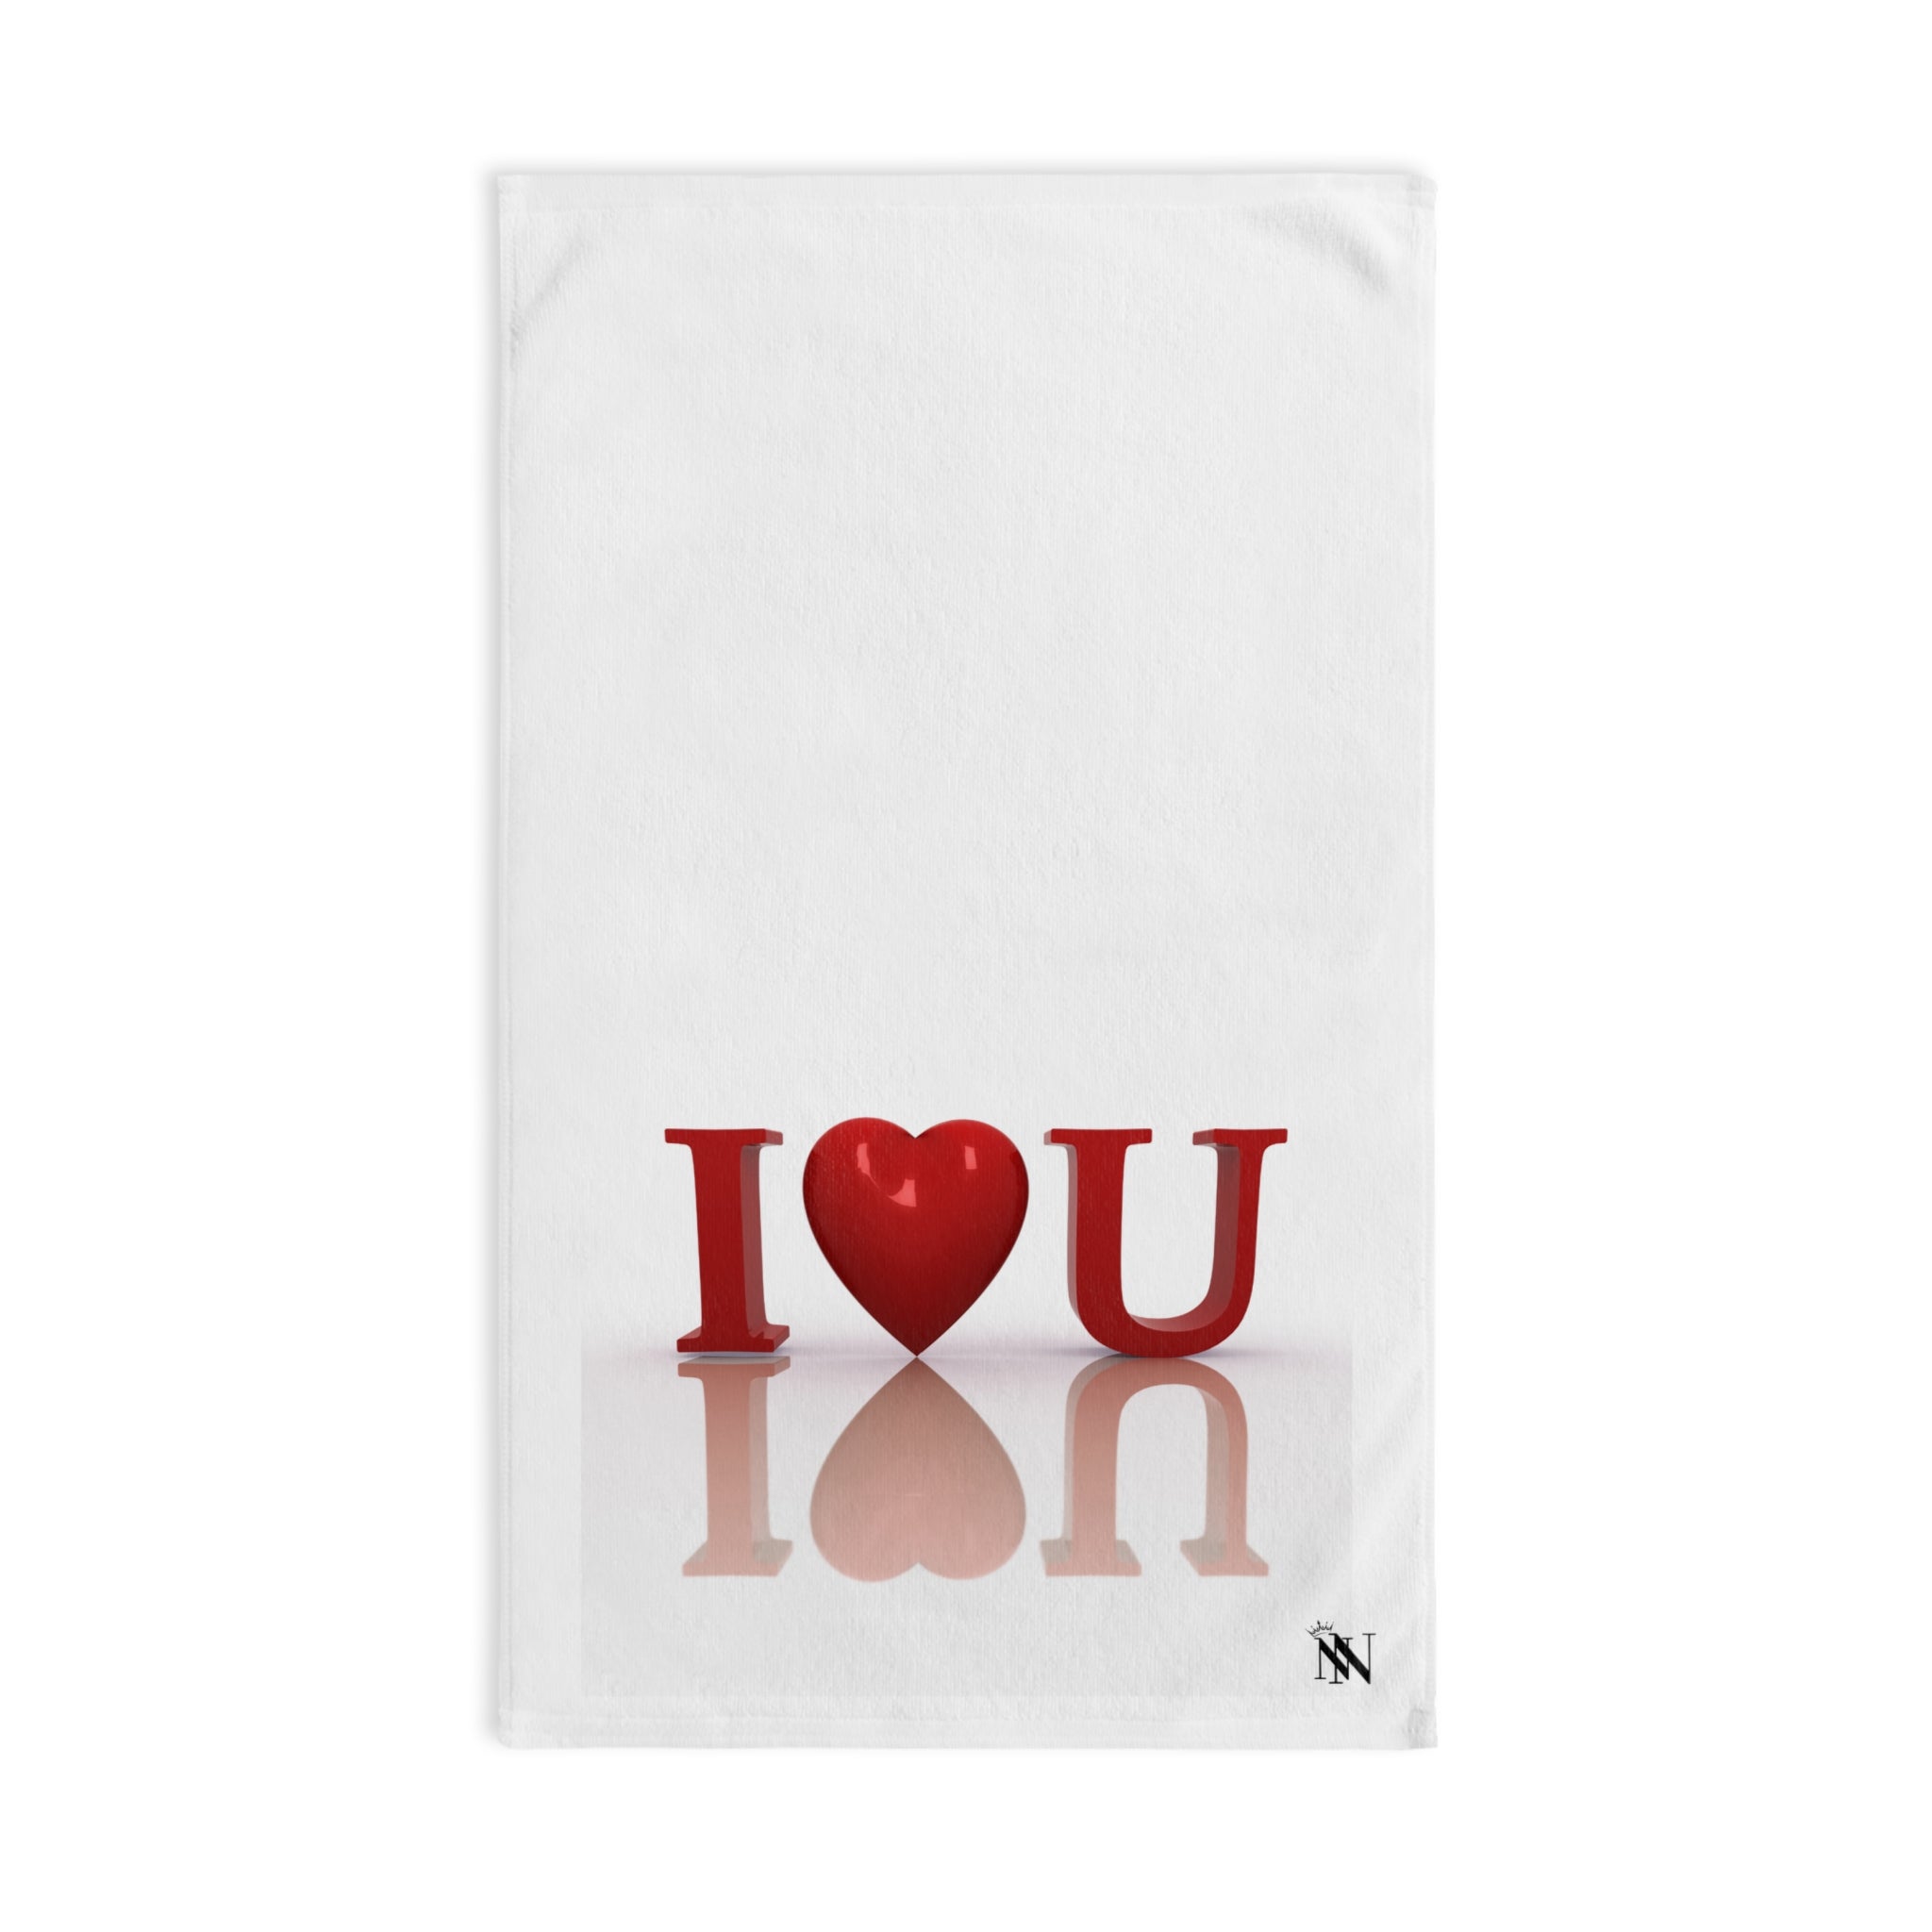 I Love You 3D White | Funny Gifts for Men - Gifts for Him - Birthday Gifts for Men, Him, Her, Husband, Boyfriend, Girlfriend, New Couple Gifts, Fathers & Valentines Day Gifts, Christmas Gifts NECTAR NAPKINS